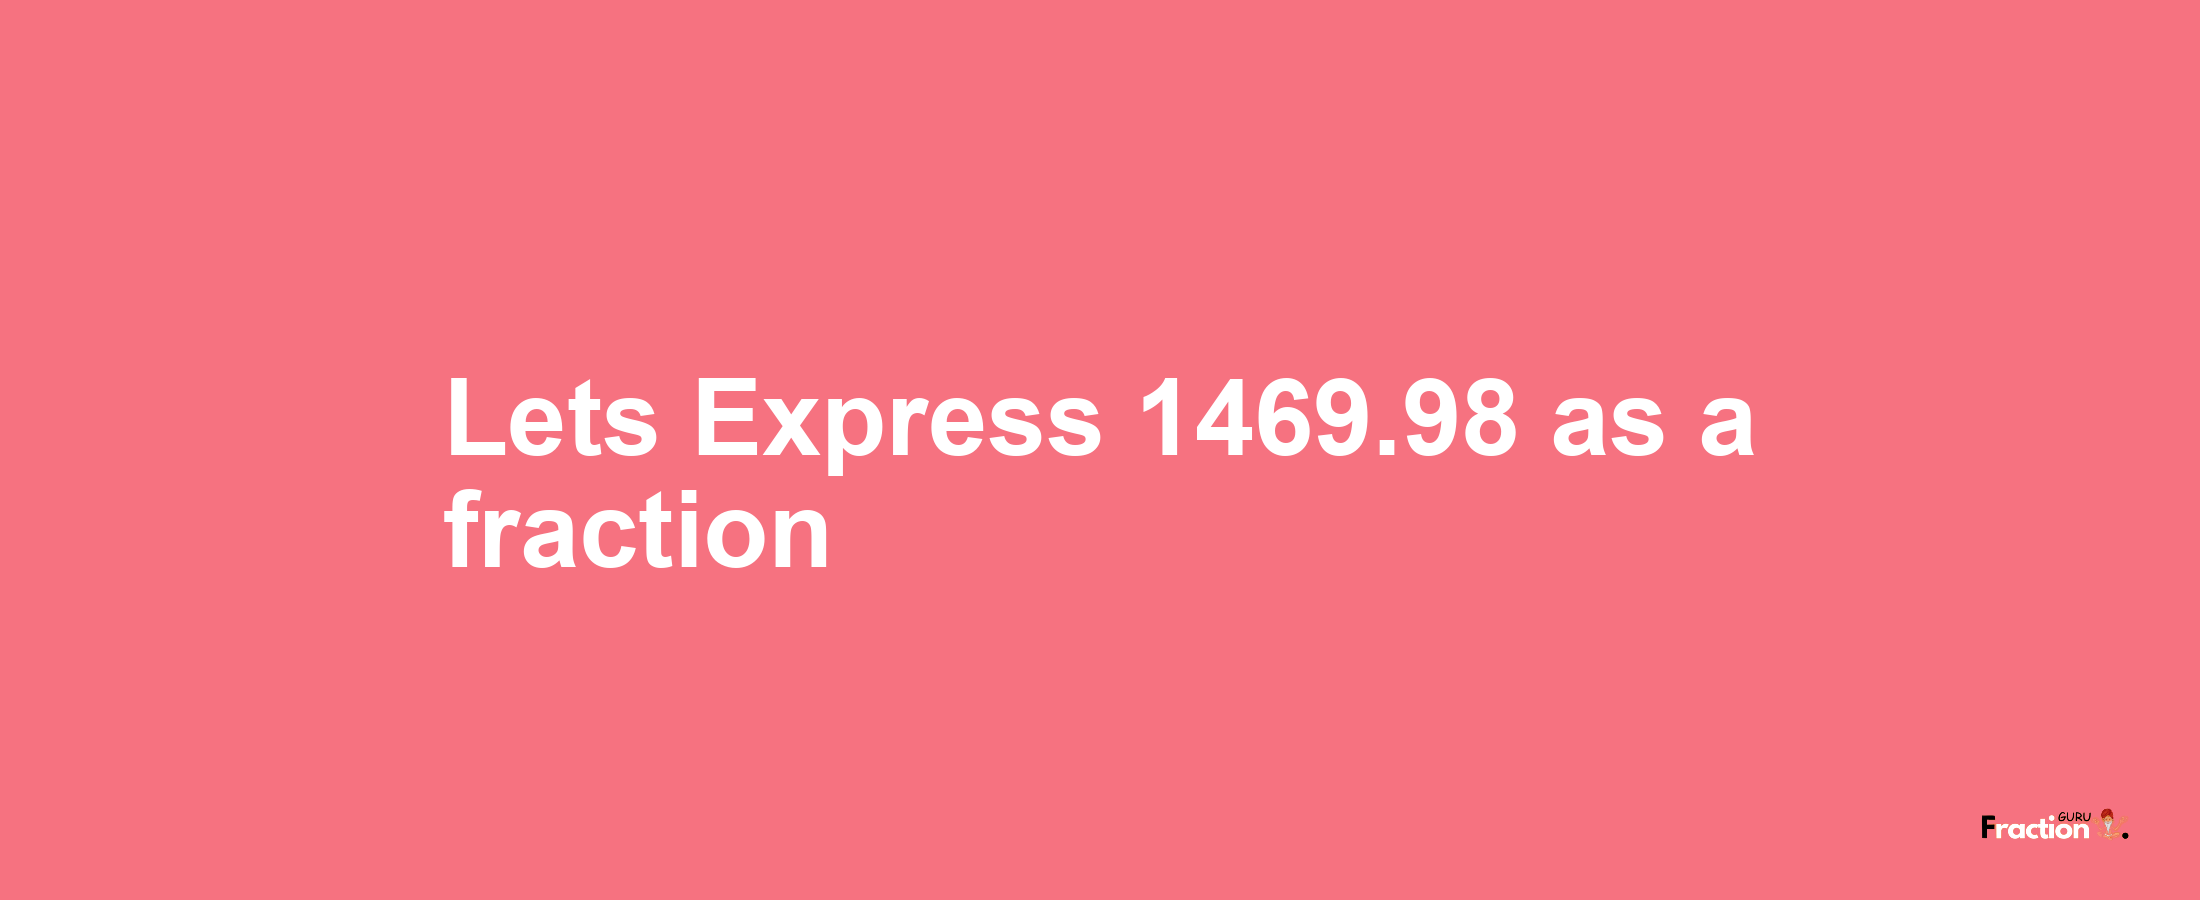 Lets Express 1469.98 as afraction